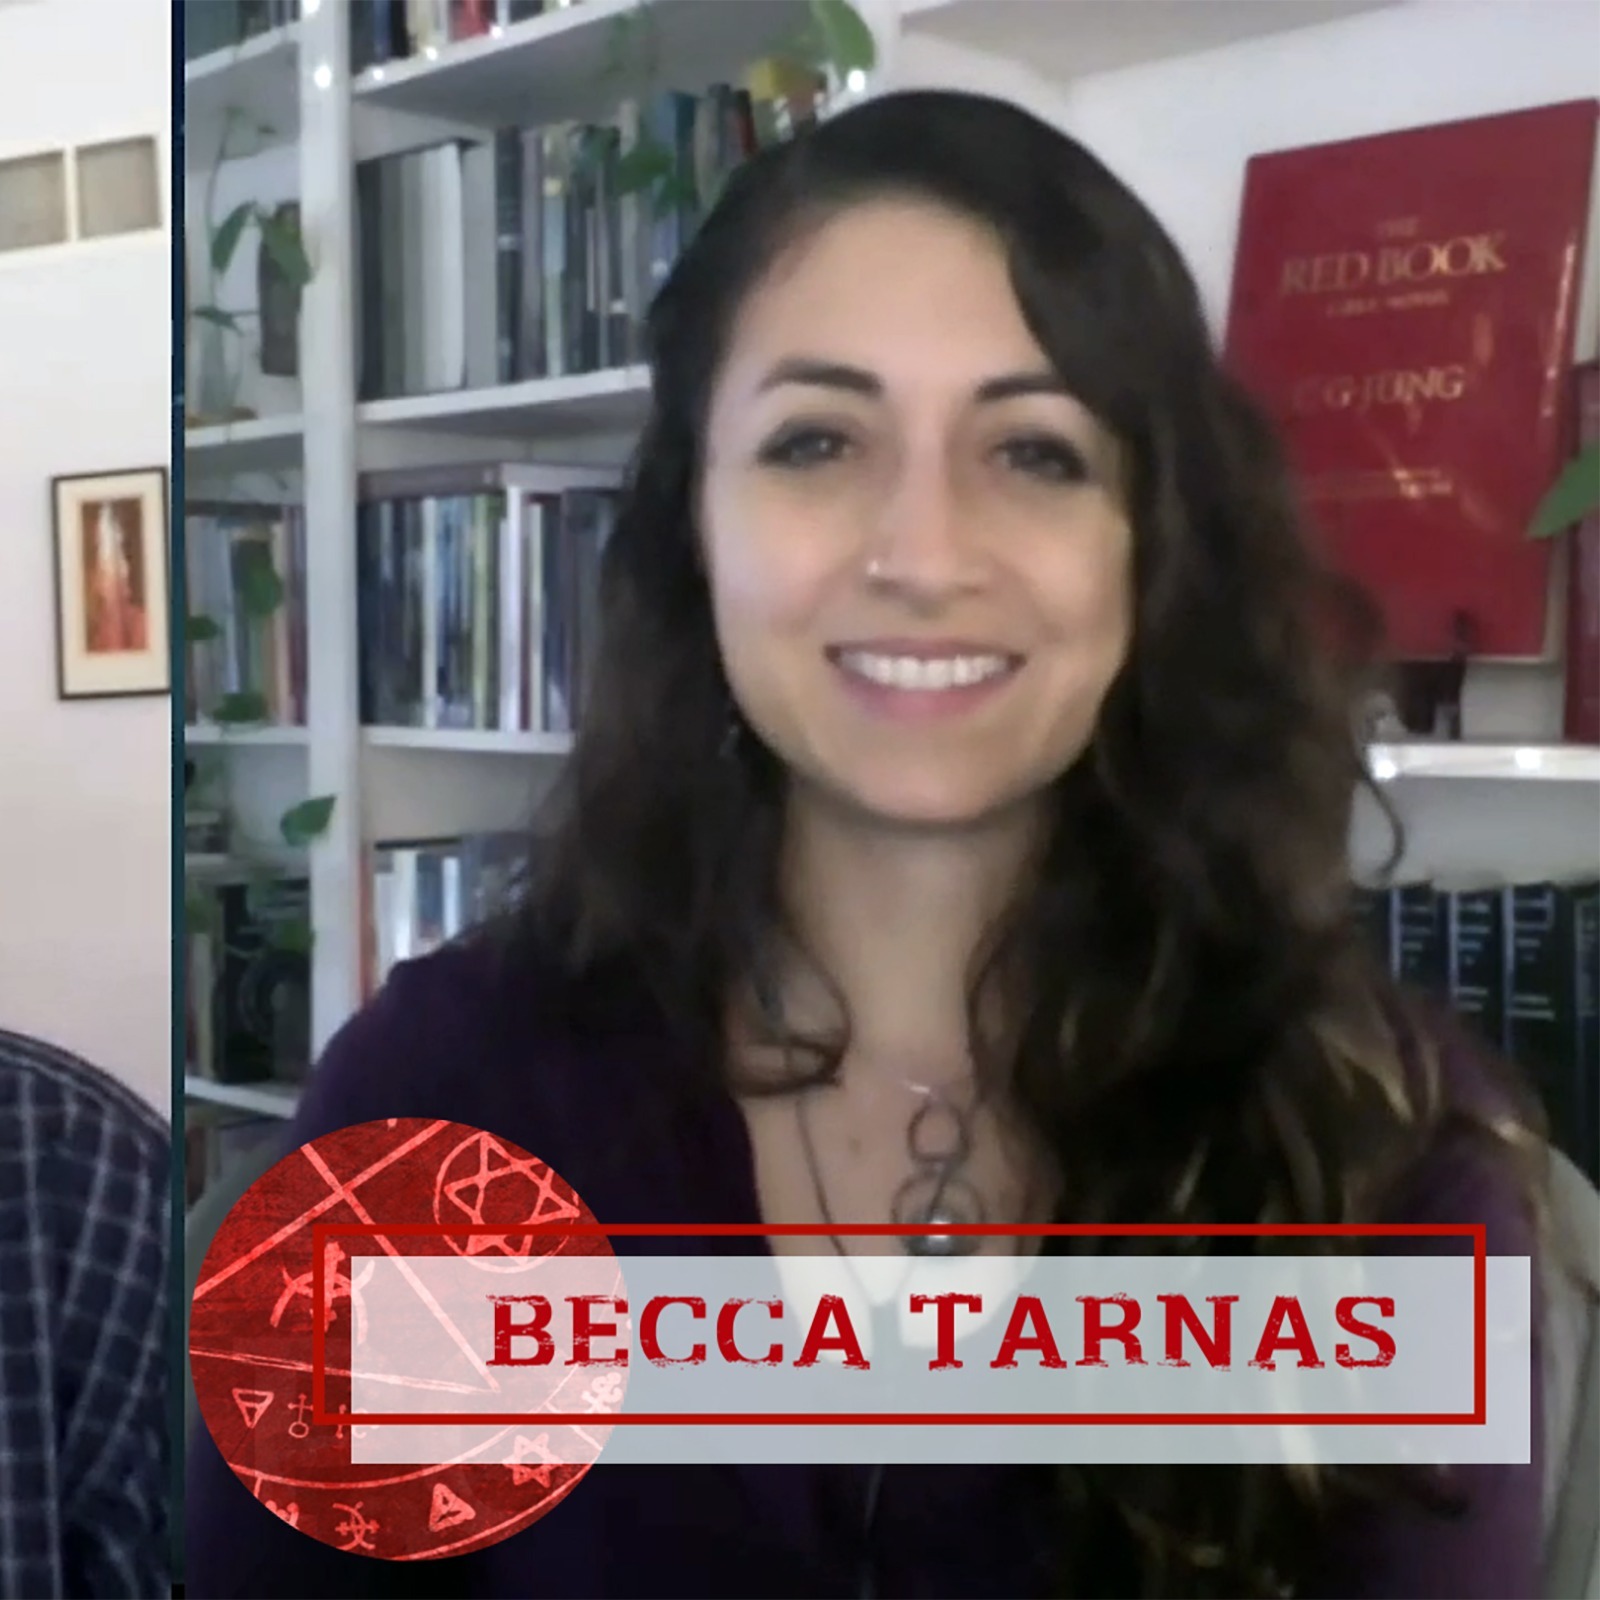 Becca Tarnas on Tolkien, Jung, and Overcoming Grief